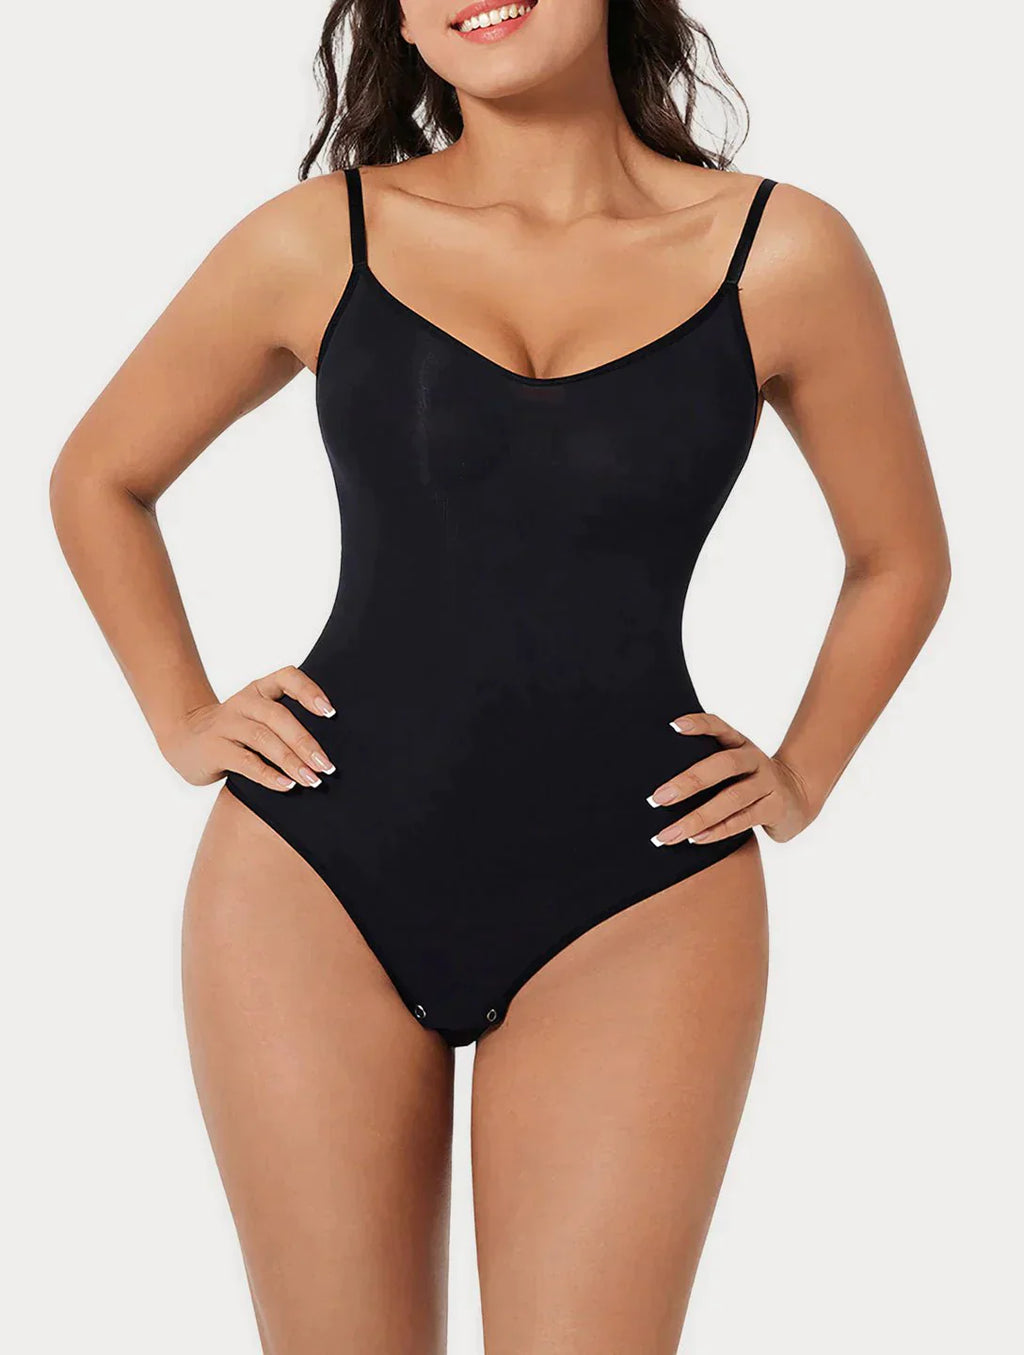 I'm on the hunt for great shapewear and bodysuits, so I put @ Fa, Bodysuit